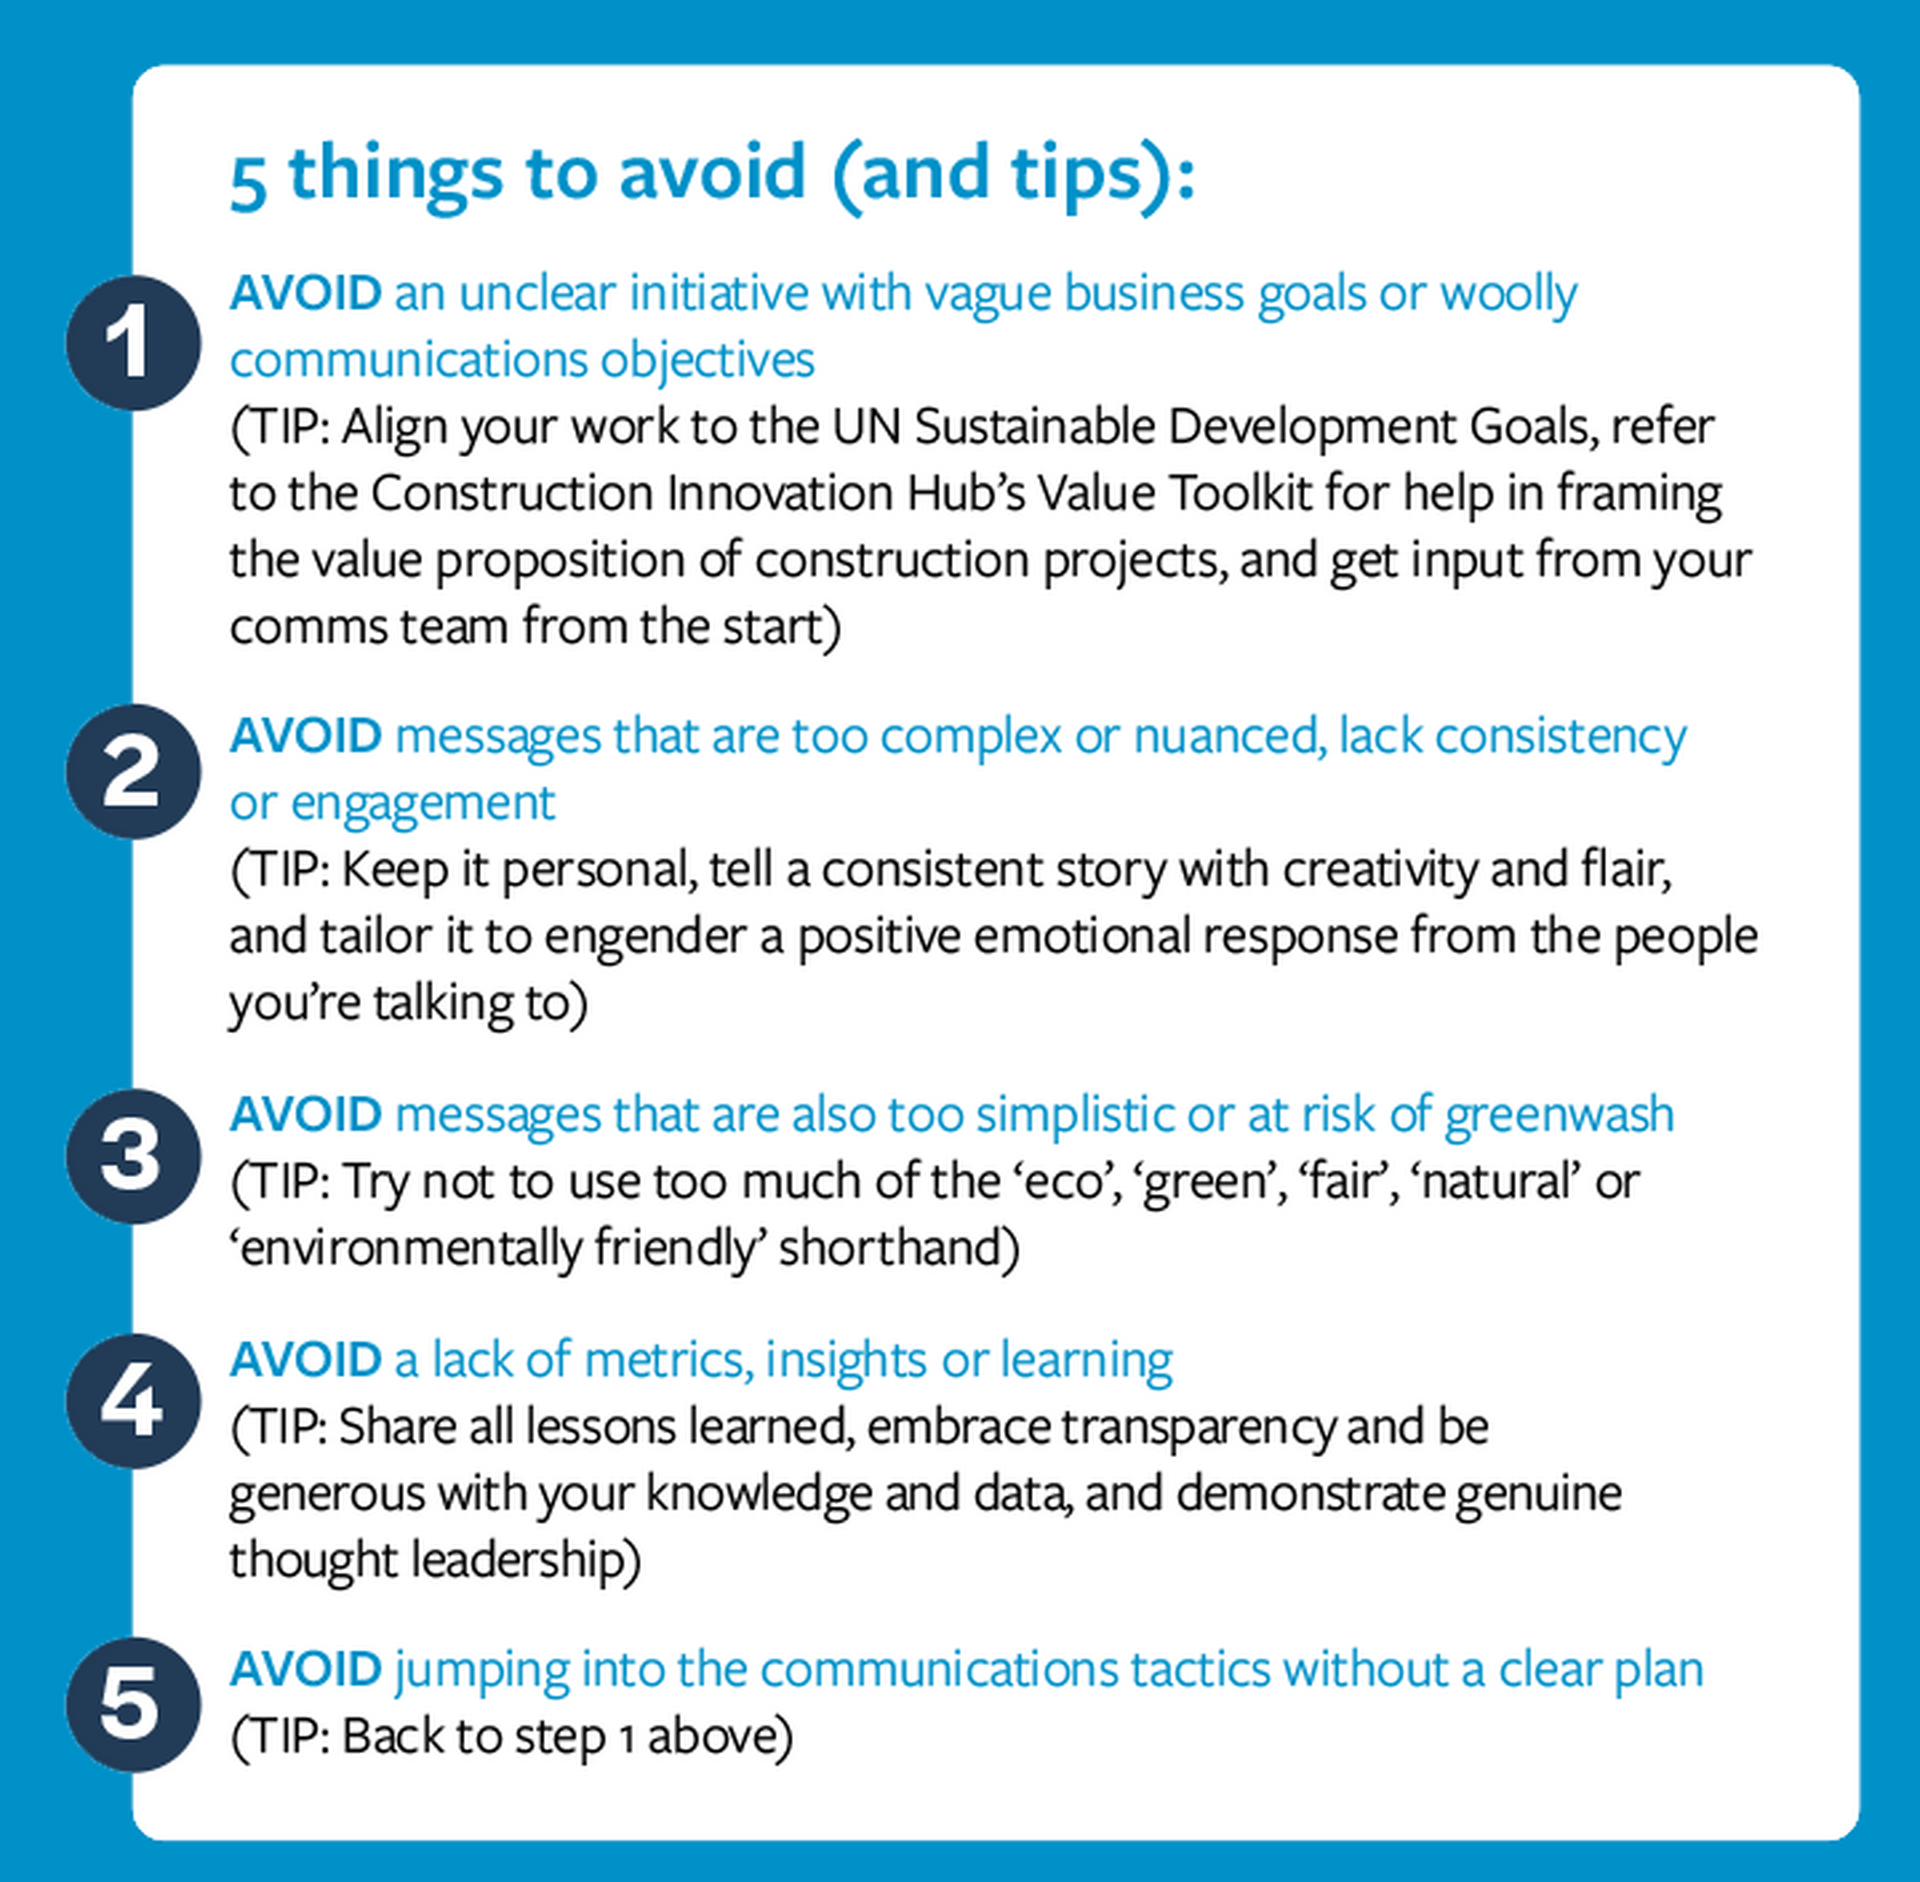 LMC's five tips for sustainable communications